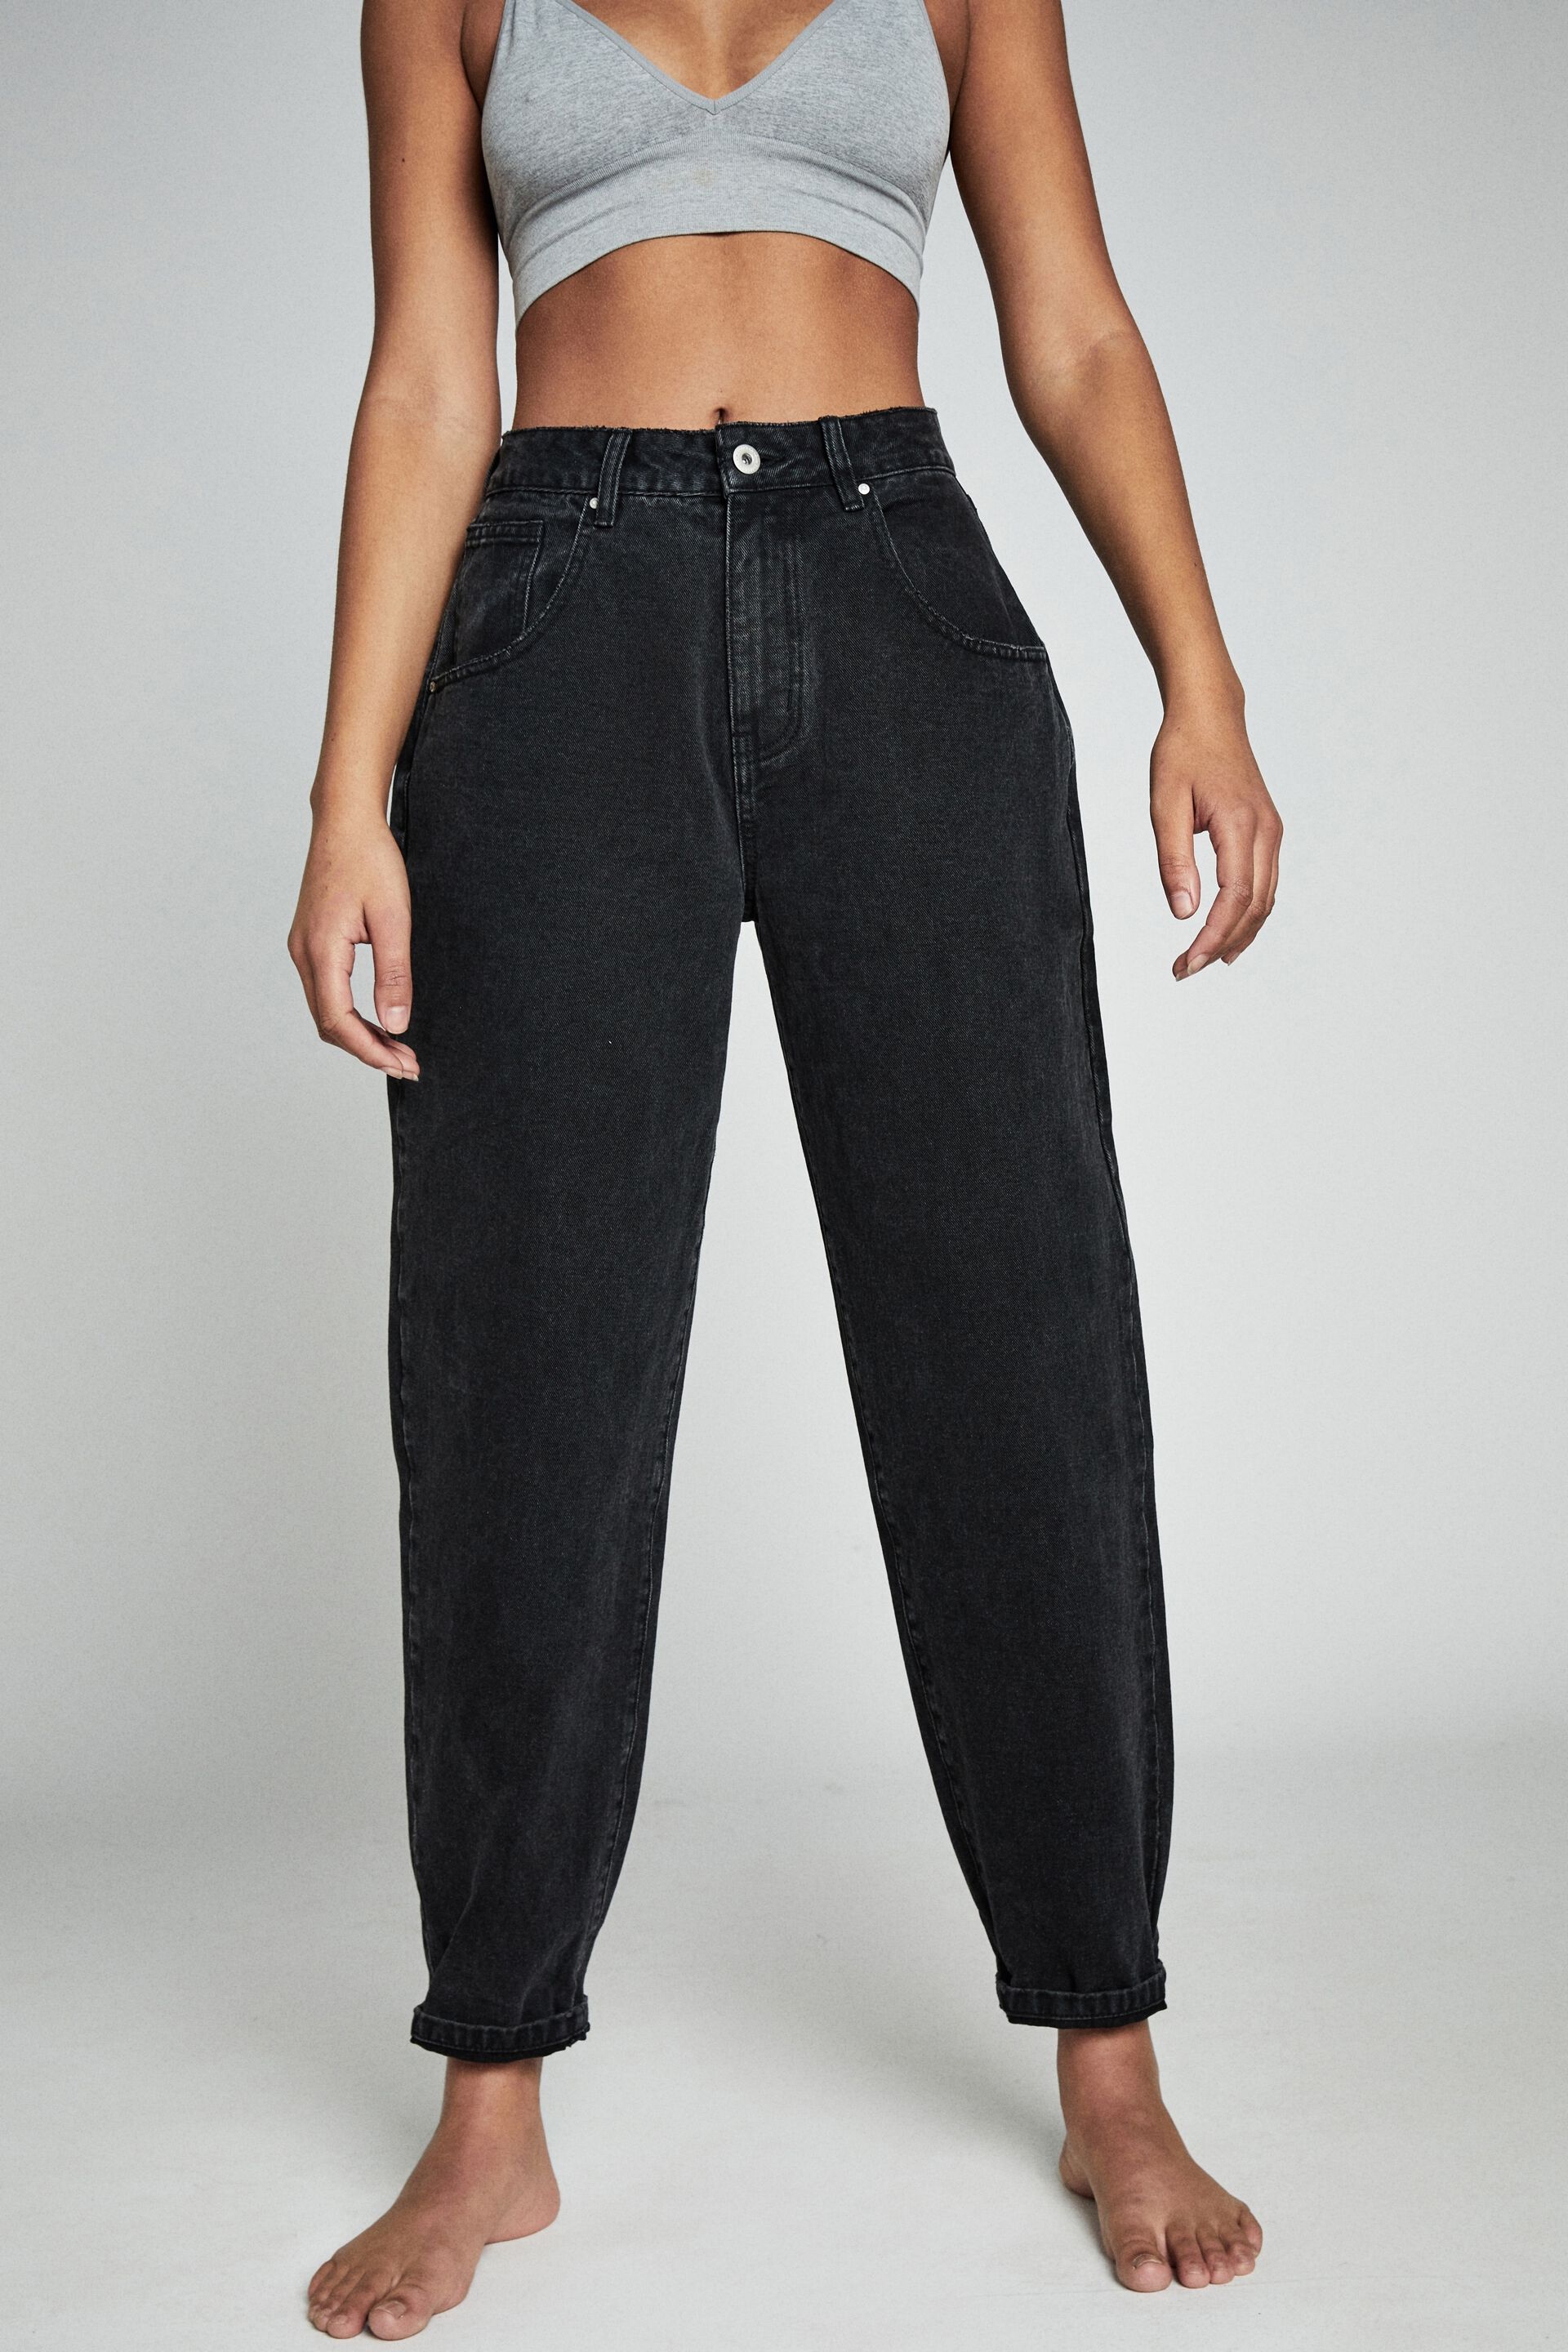 black faded mom jeans